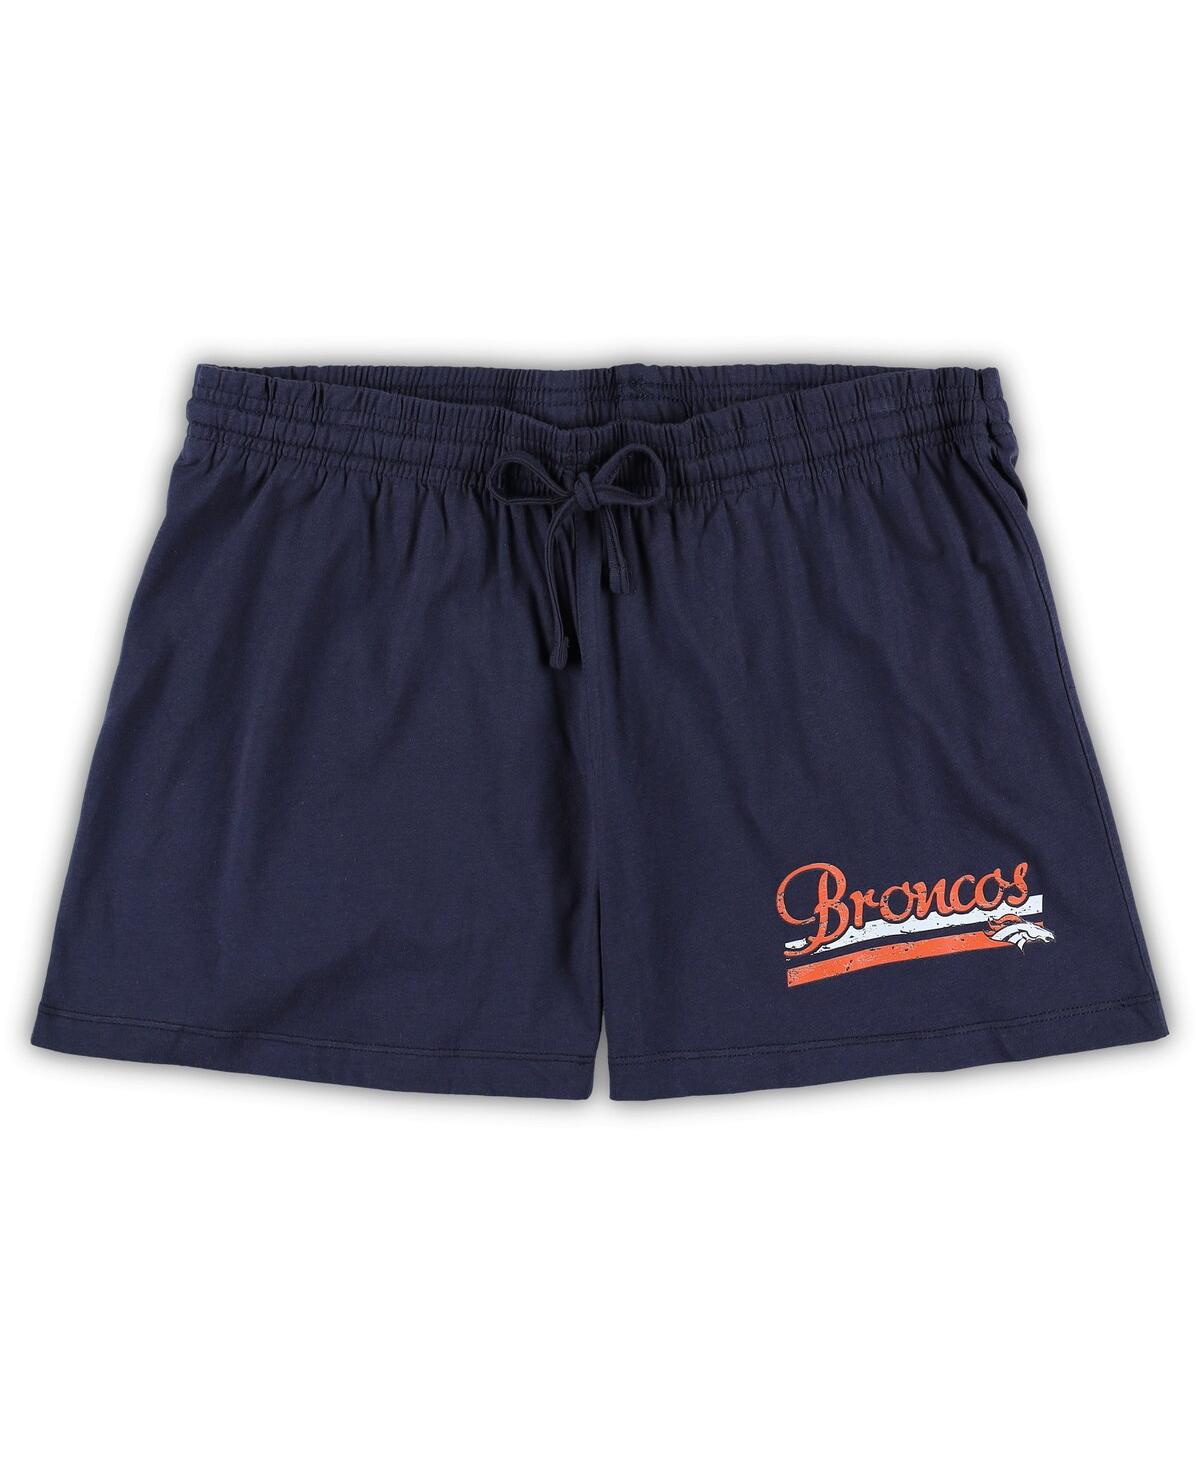 Shop Concepts Sport Women's  White, Navy Denver Broncos Plus Size Downfield T-shirt And Shorts Sleep Set In White,navy